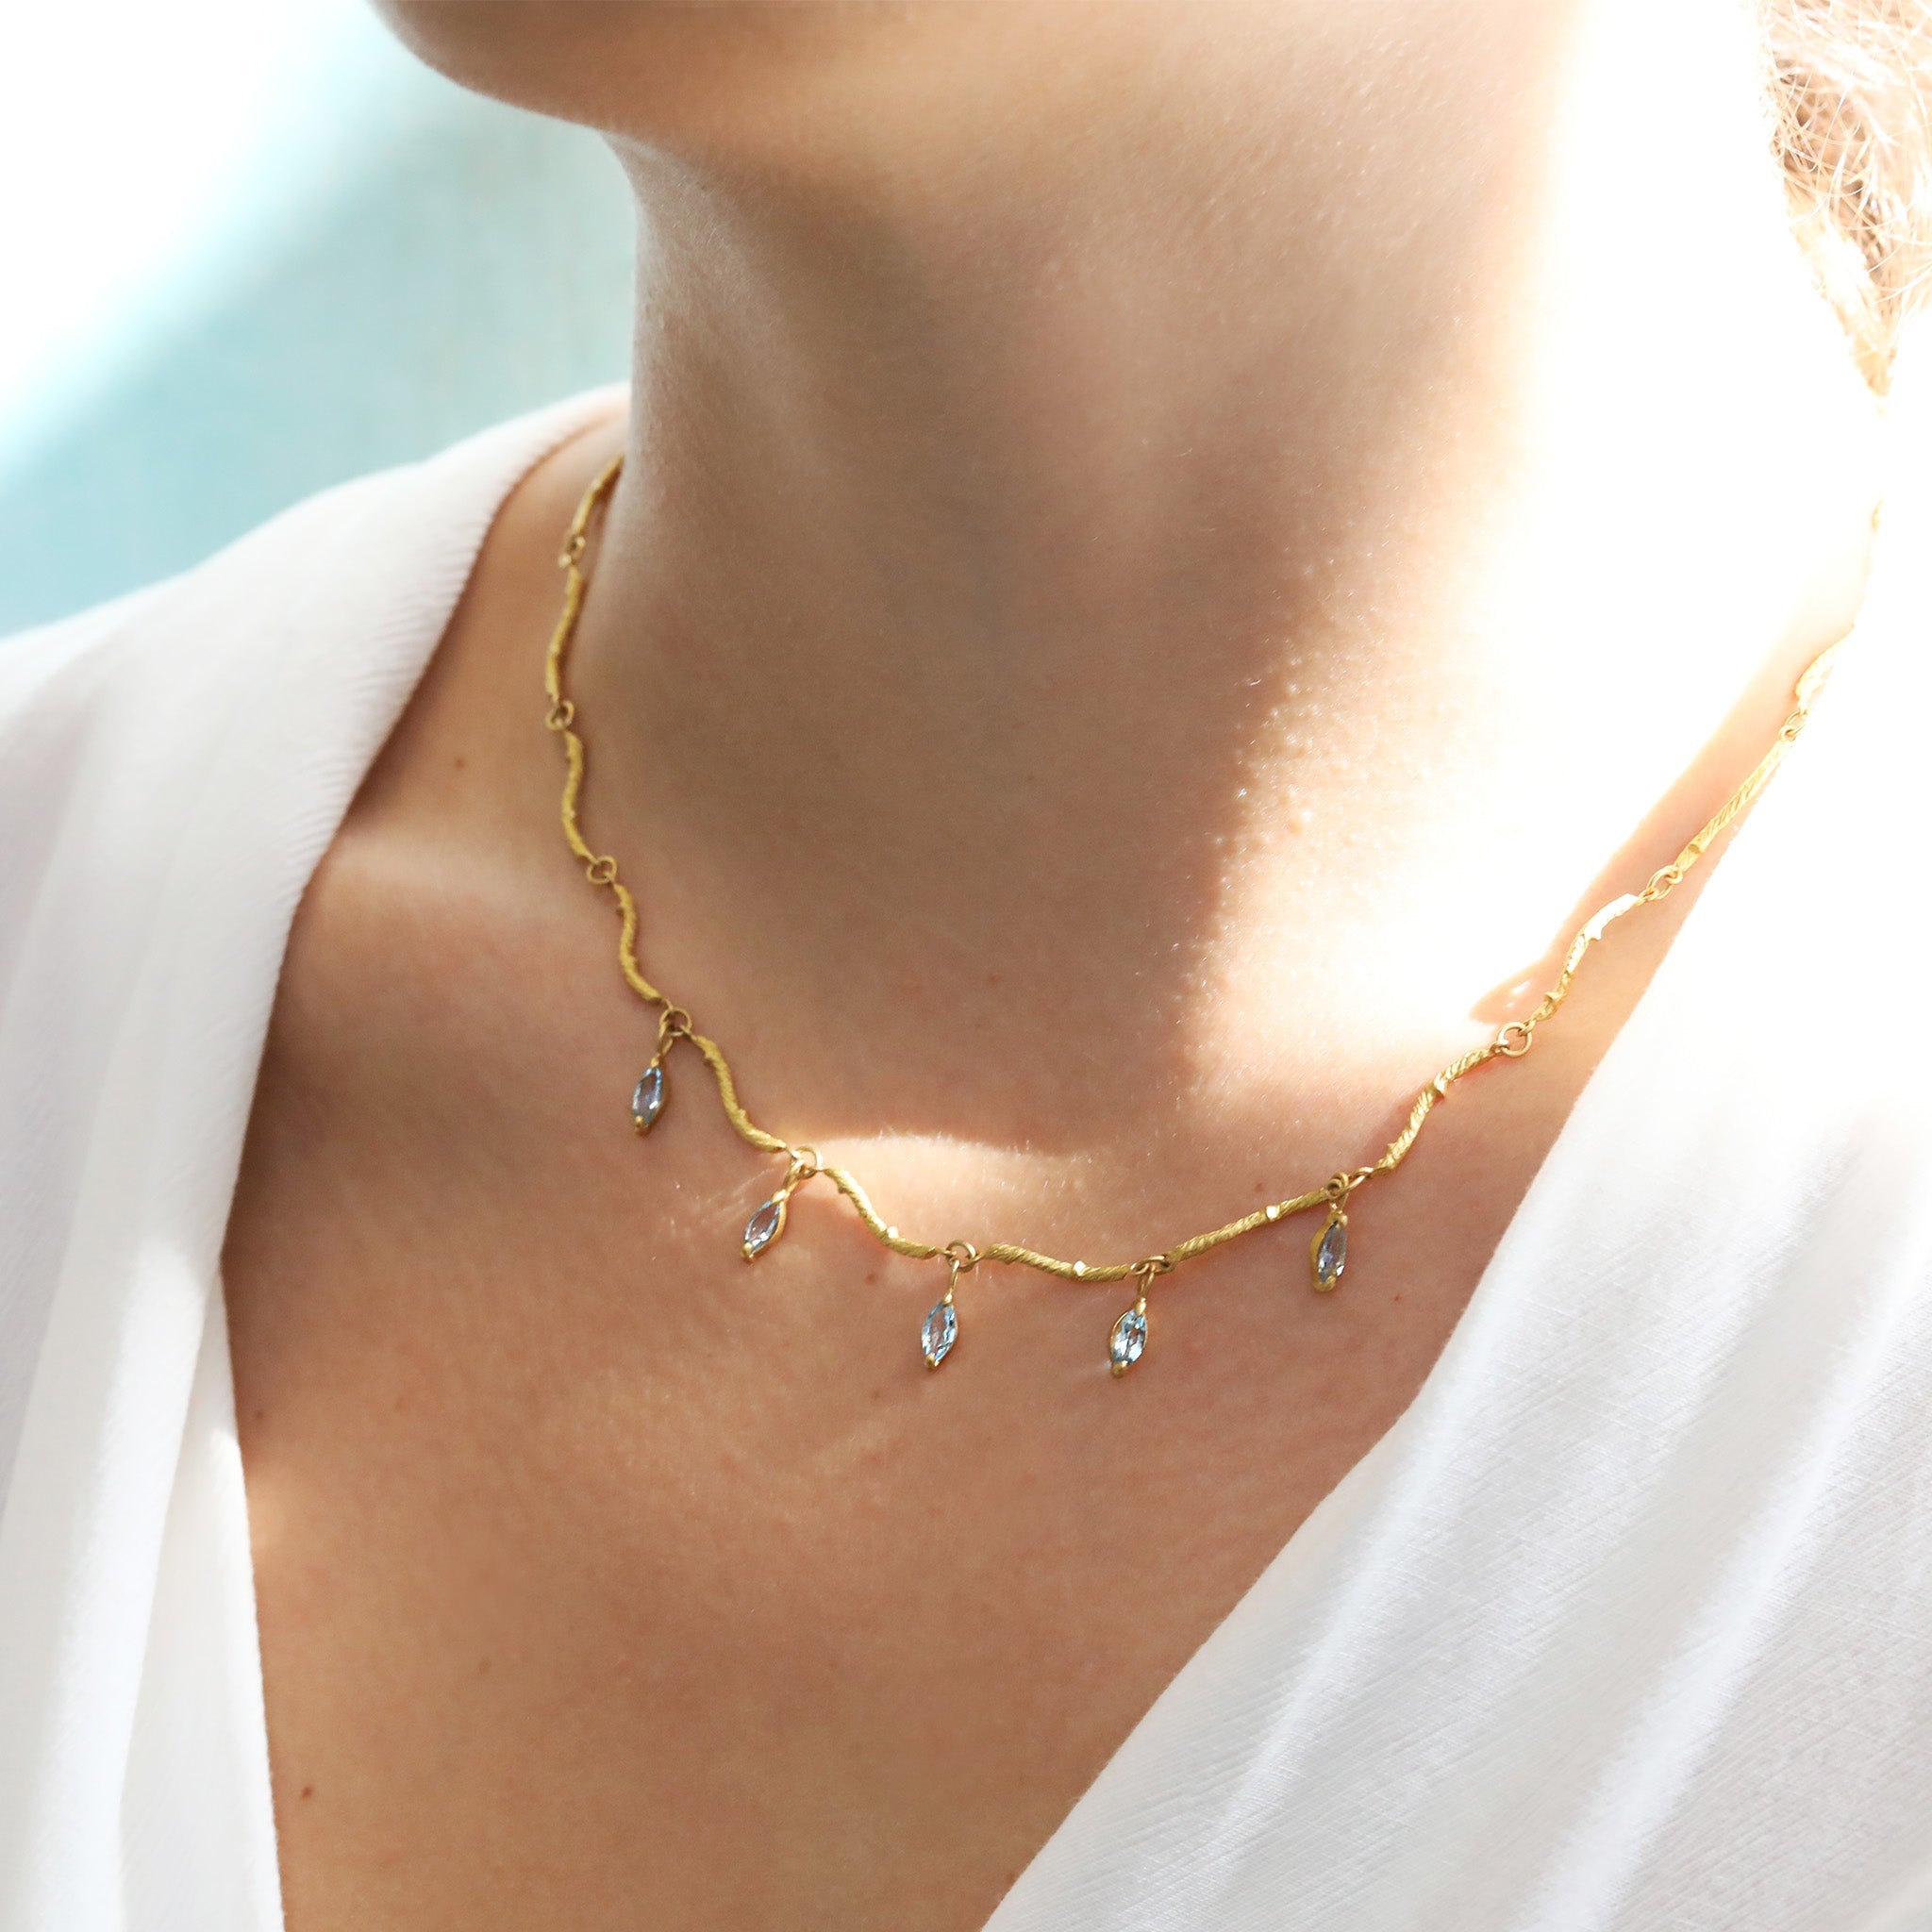 22K Gold "Twig" Chain Necklace with Aquamarine Marquise Drops - Peridot Fine Jewelry - Cathy Waterman